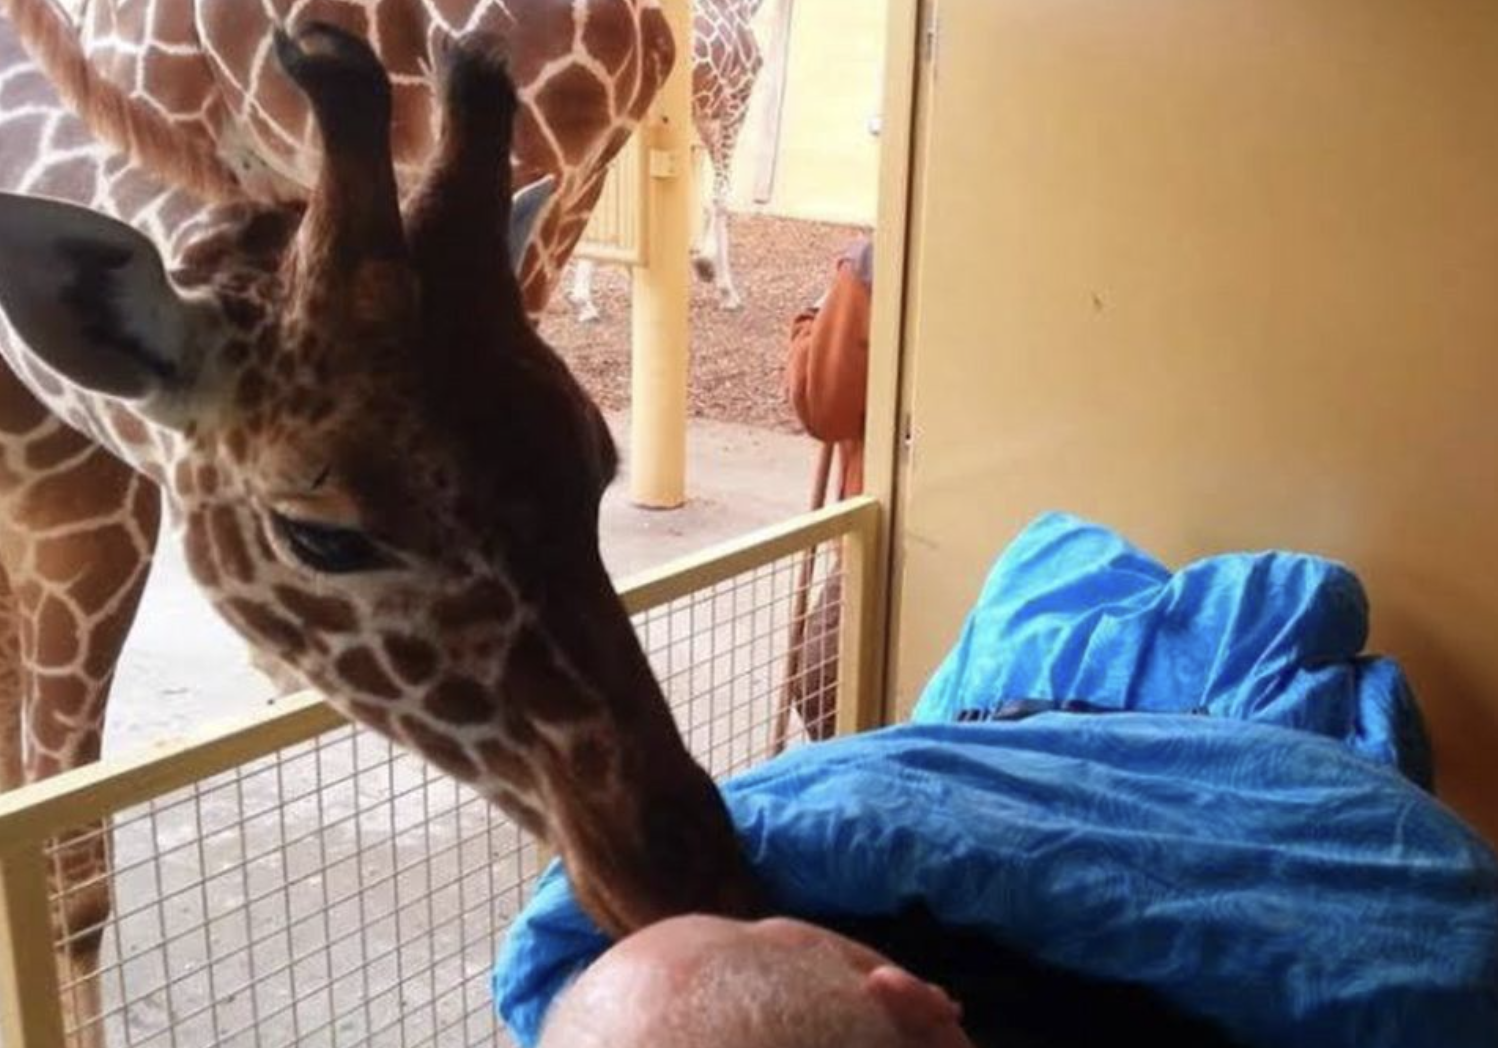 A giraffe approached him and gently kissed him goodbye, creating a touching moment.